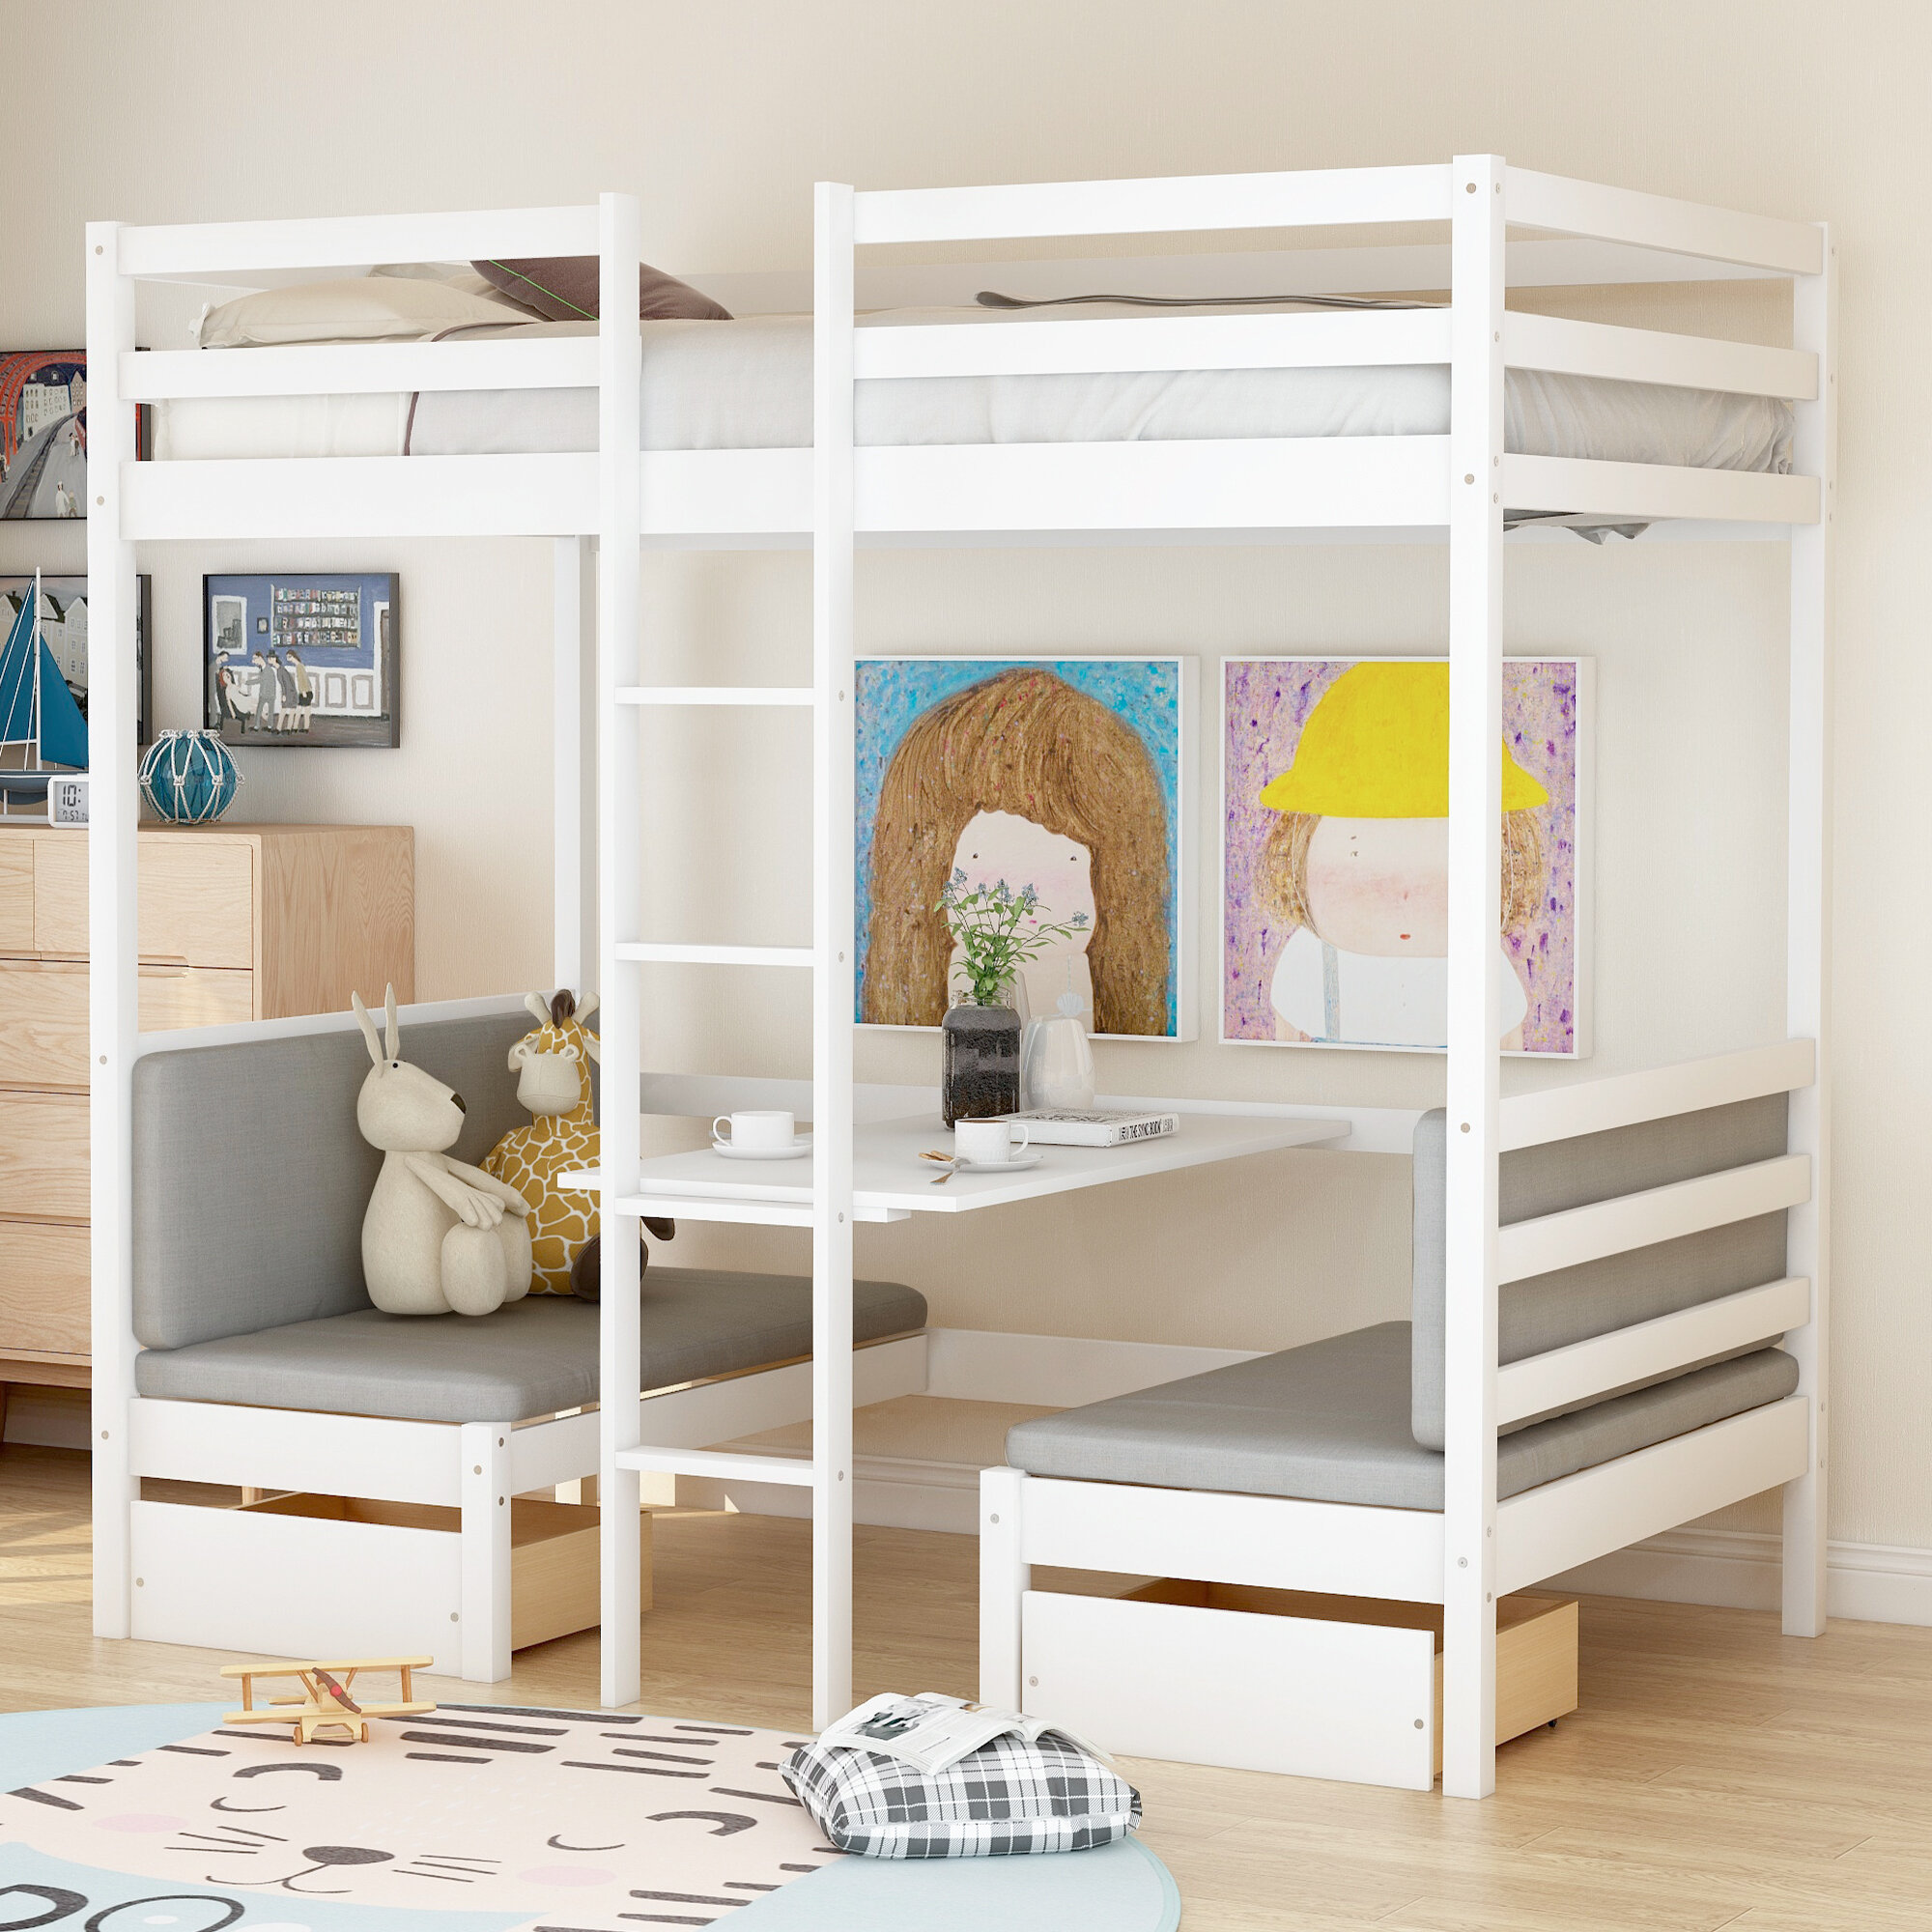 Isabelle Max Coles Twin Bunk Configurations Bed With Drawers And